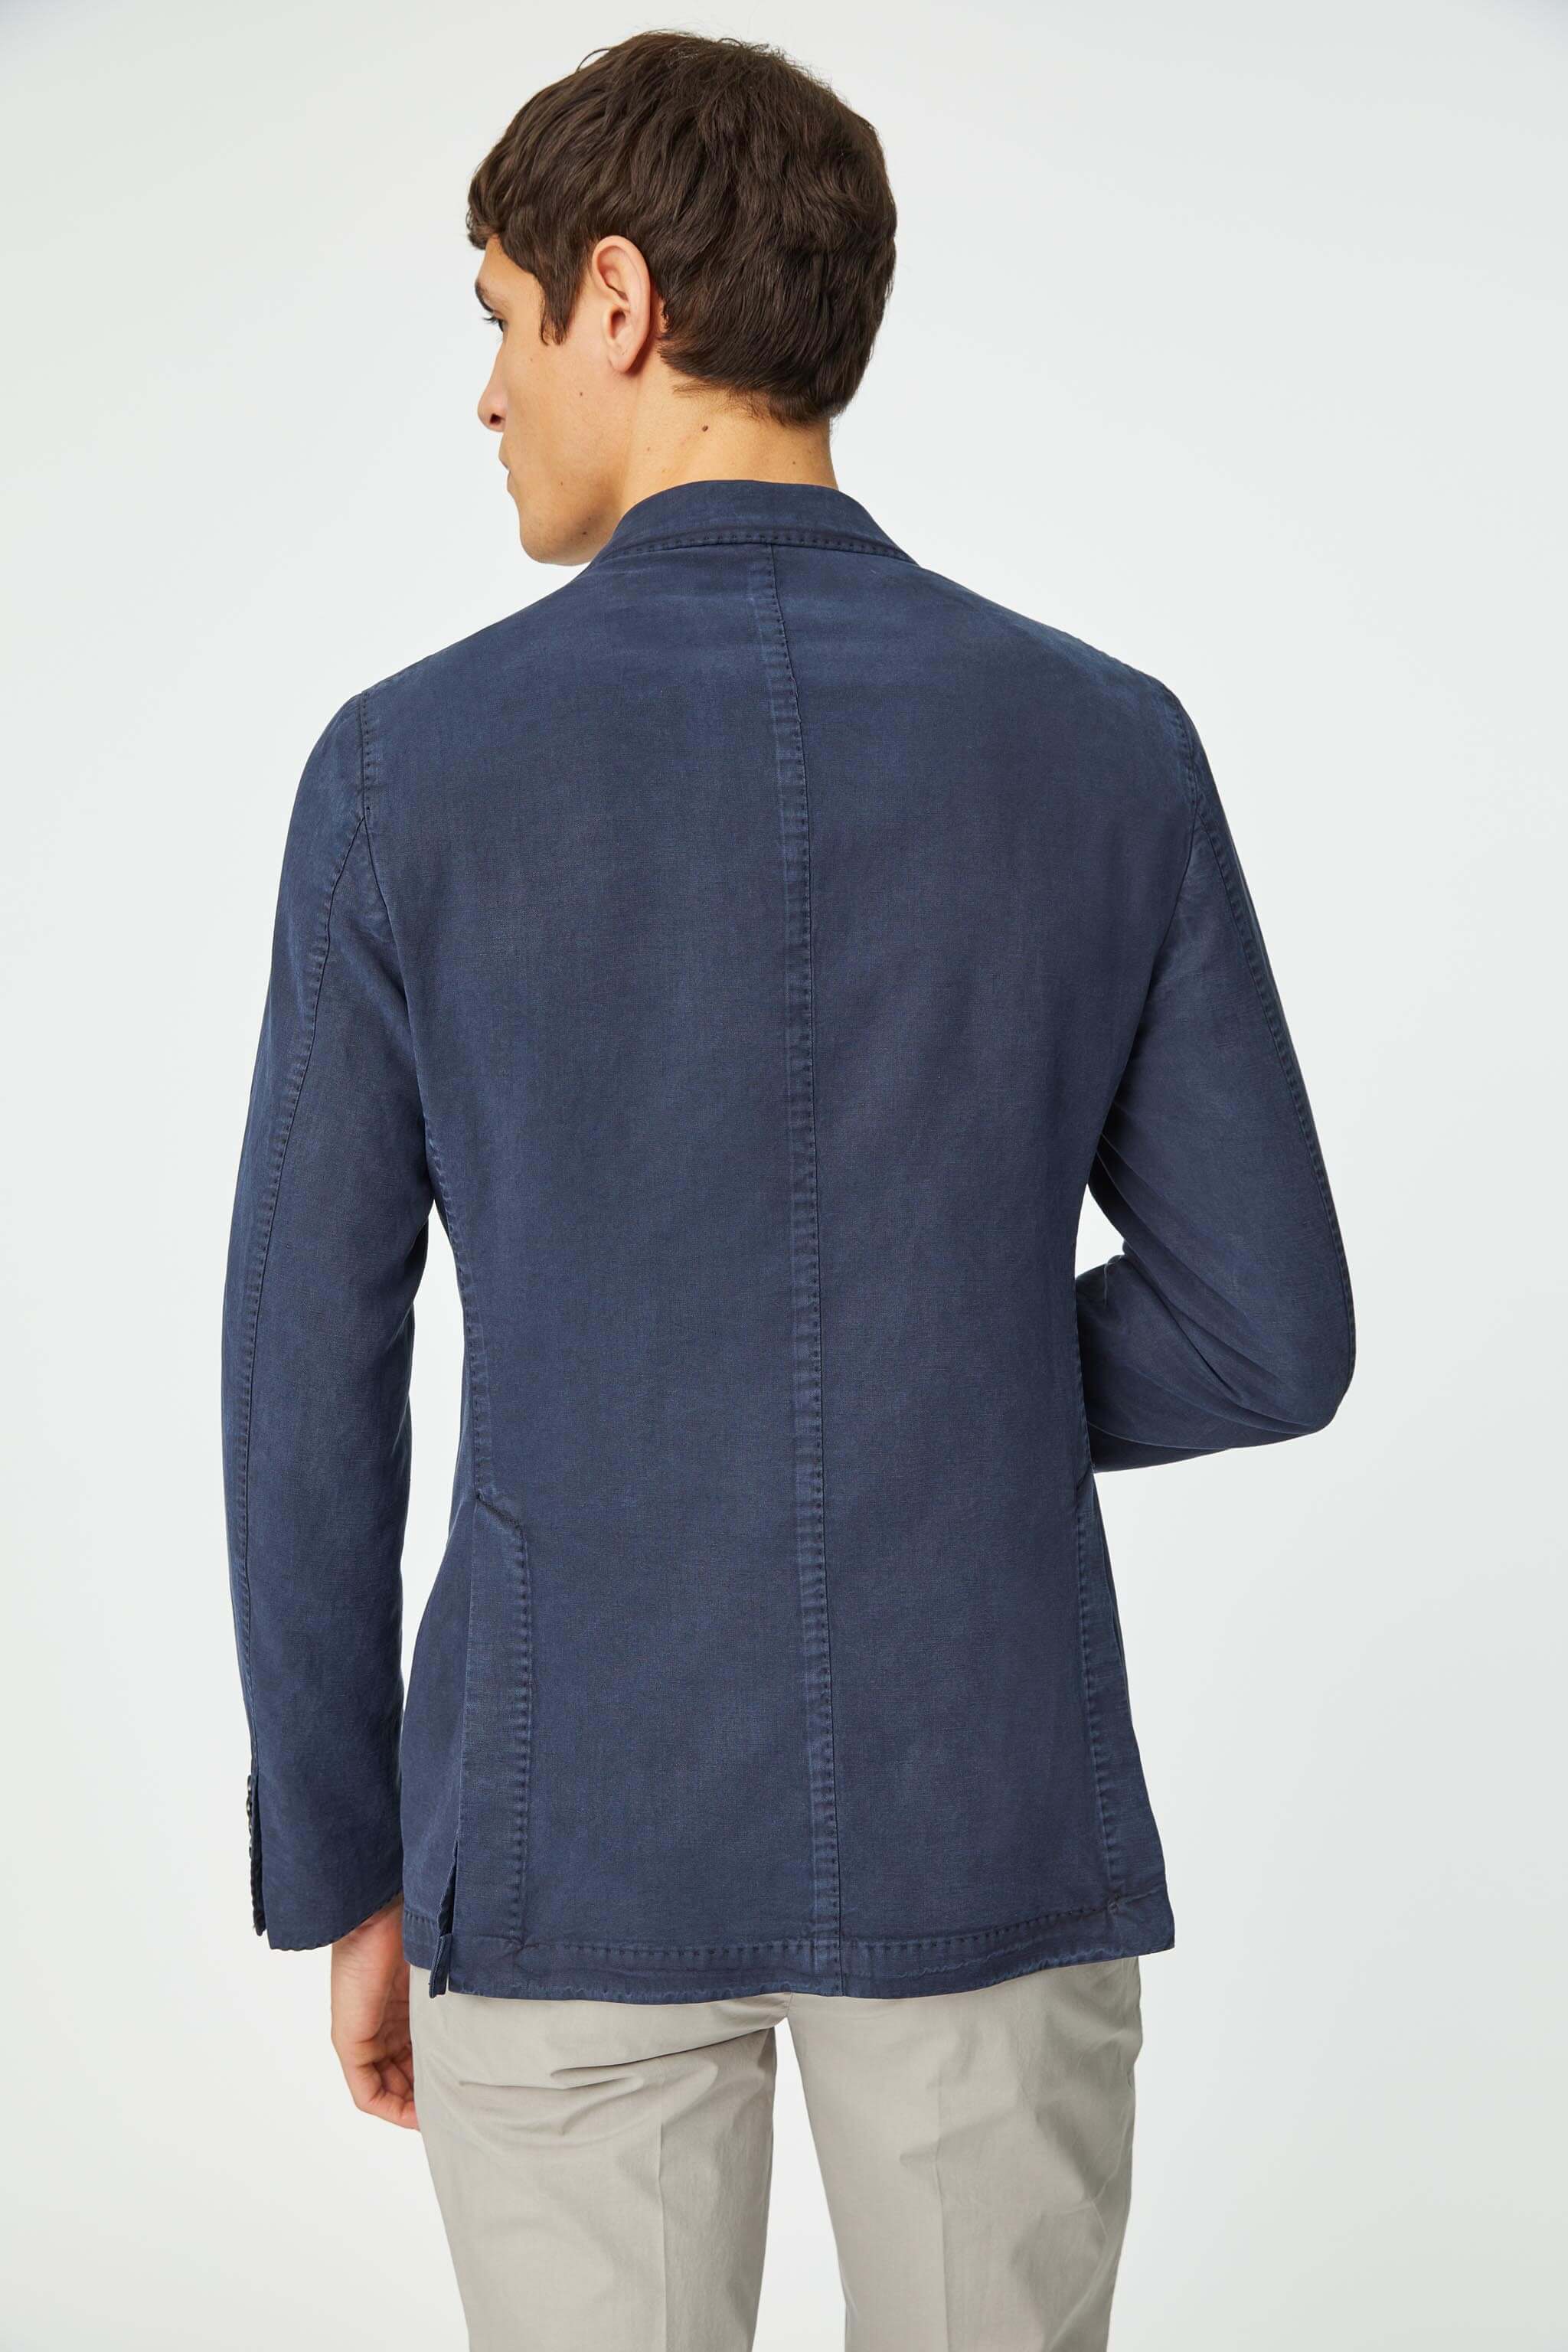 Garment-dyed JIM jacket in blue